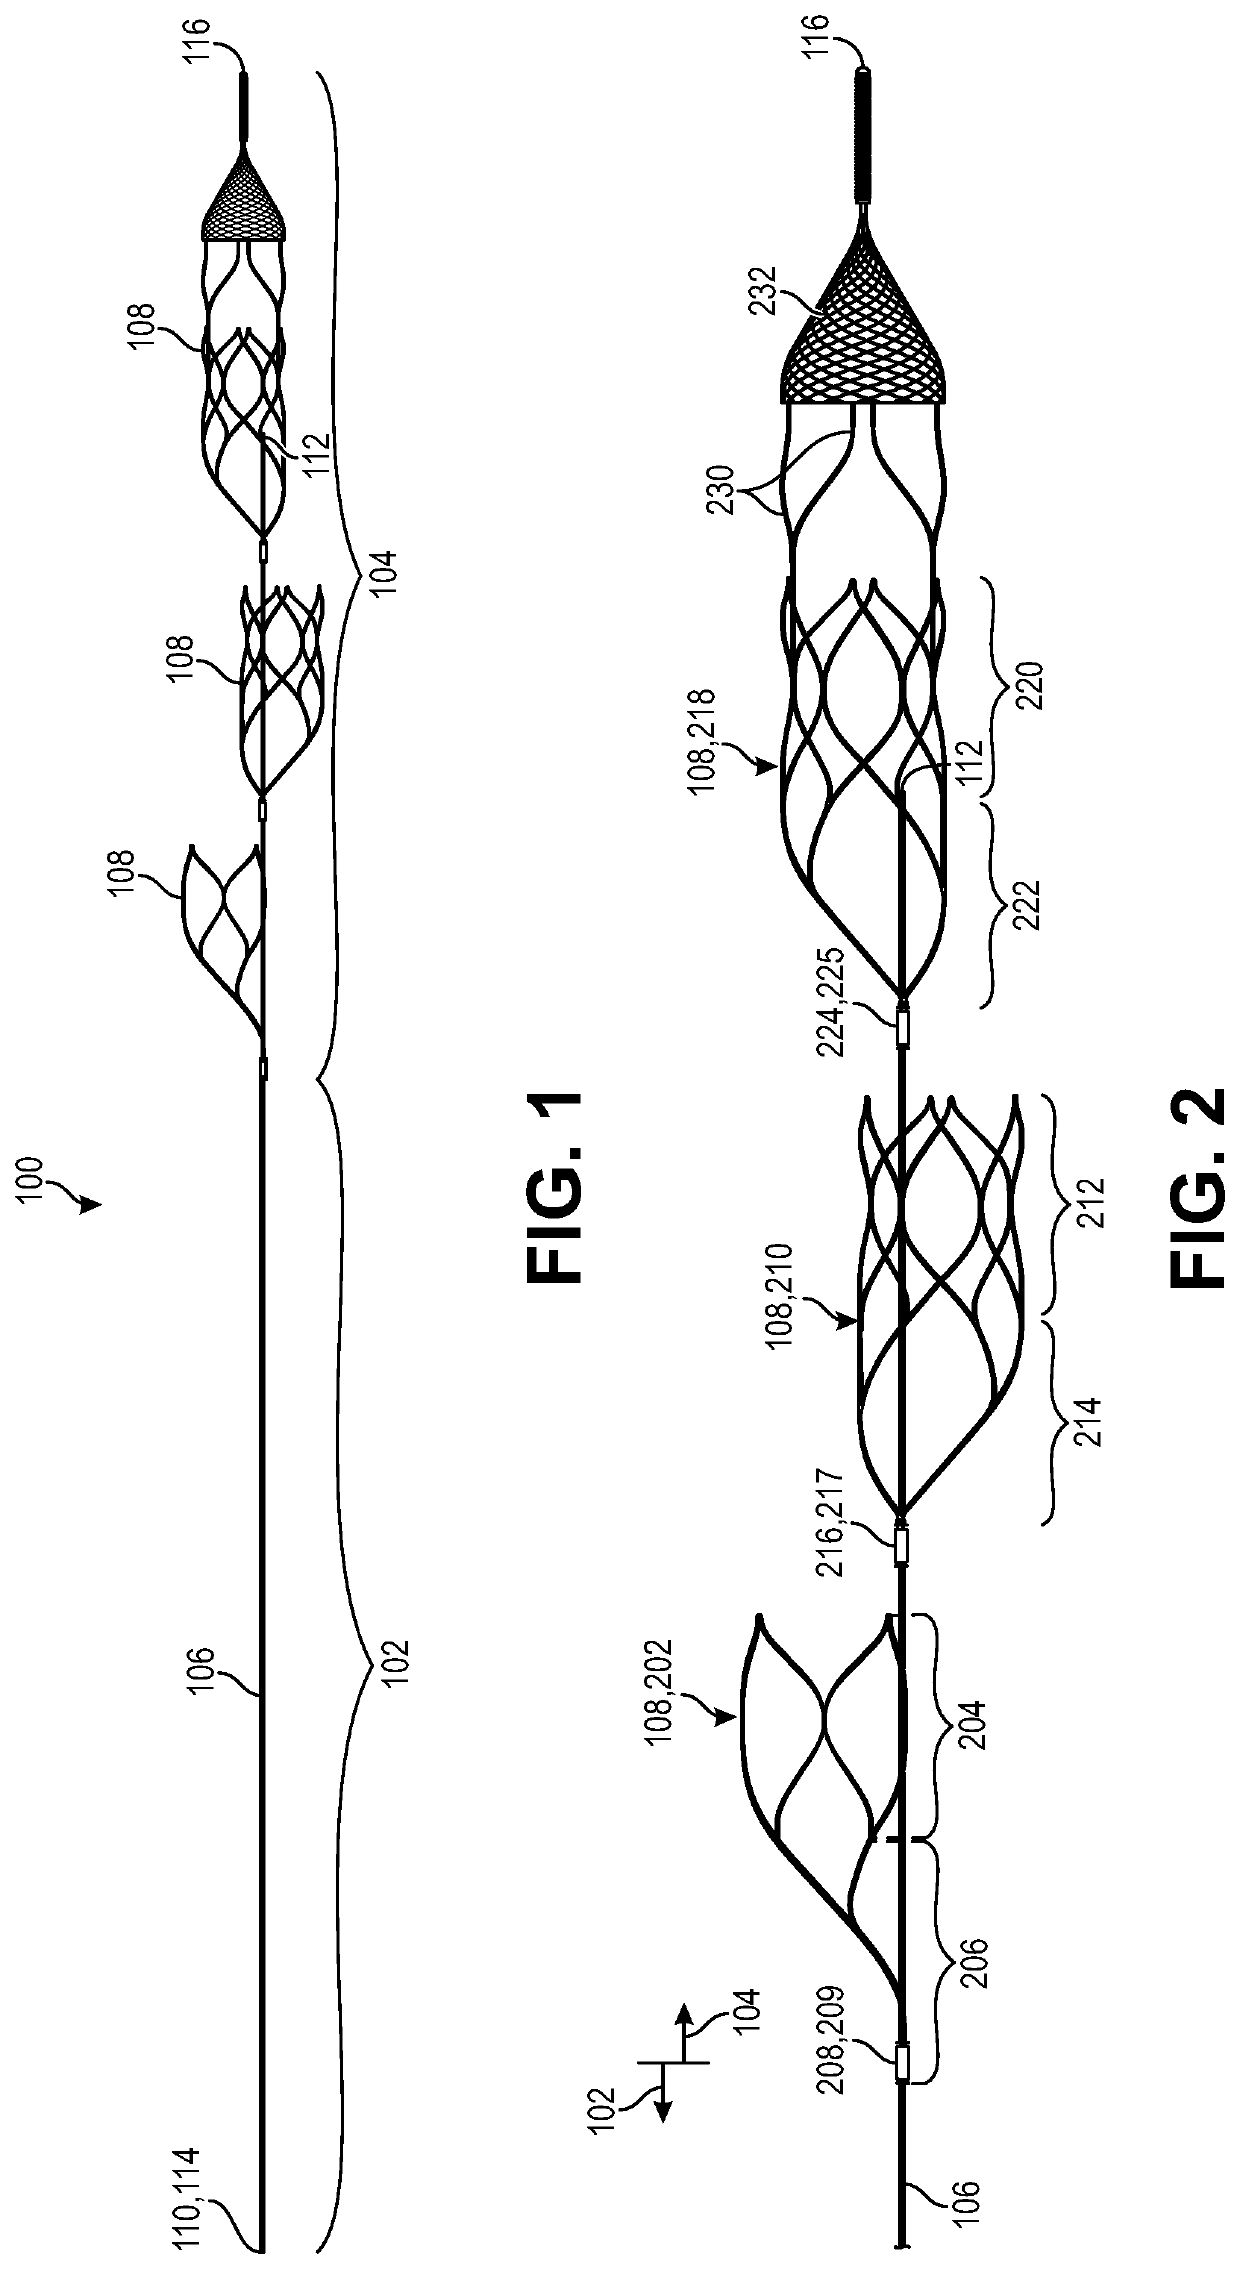 Thrombectomy device and method